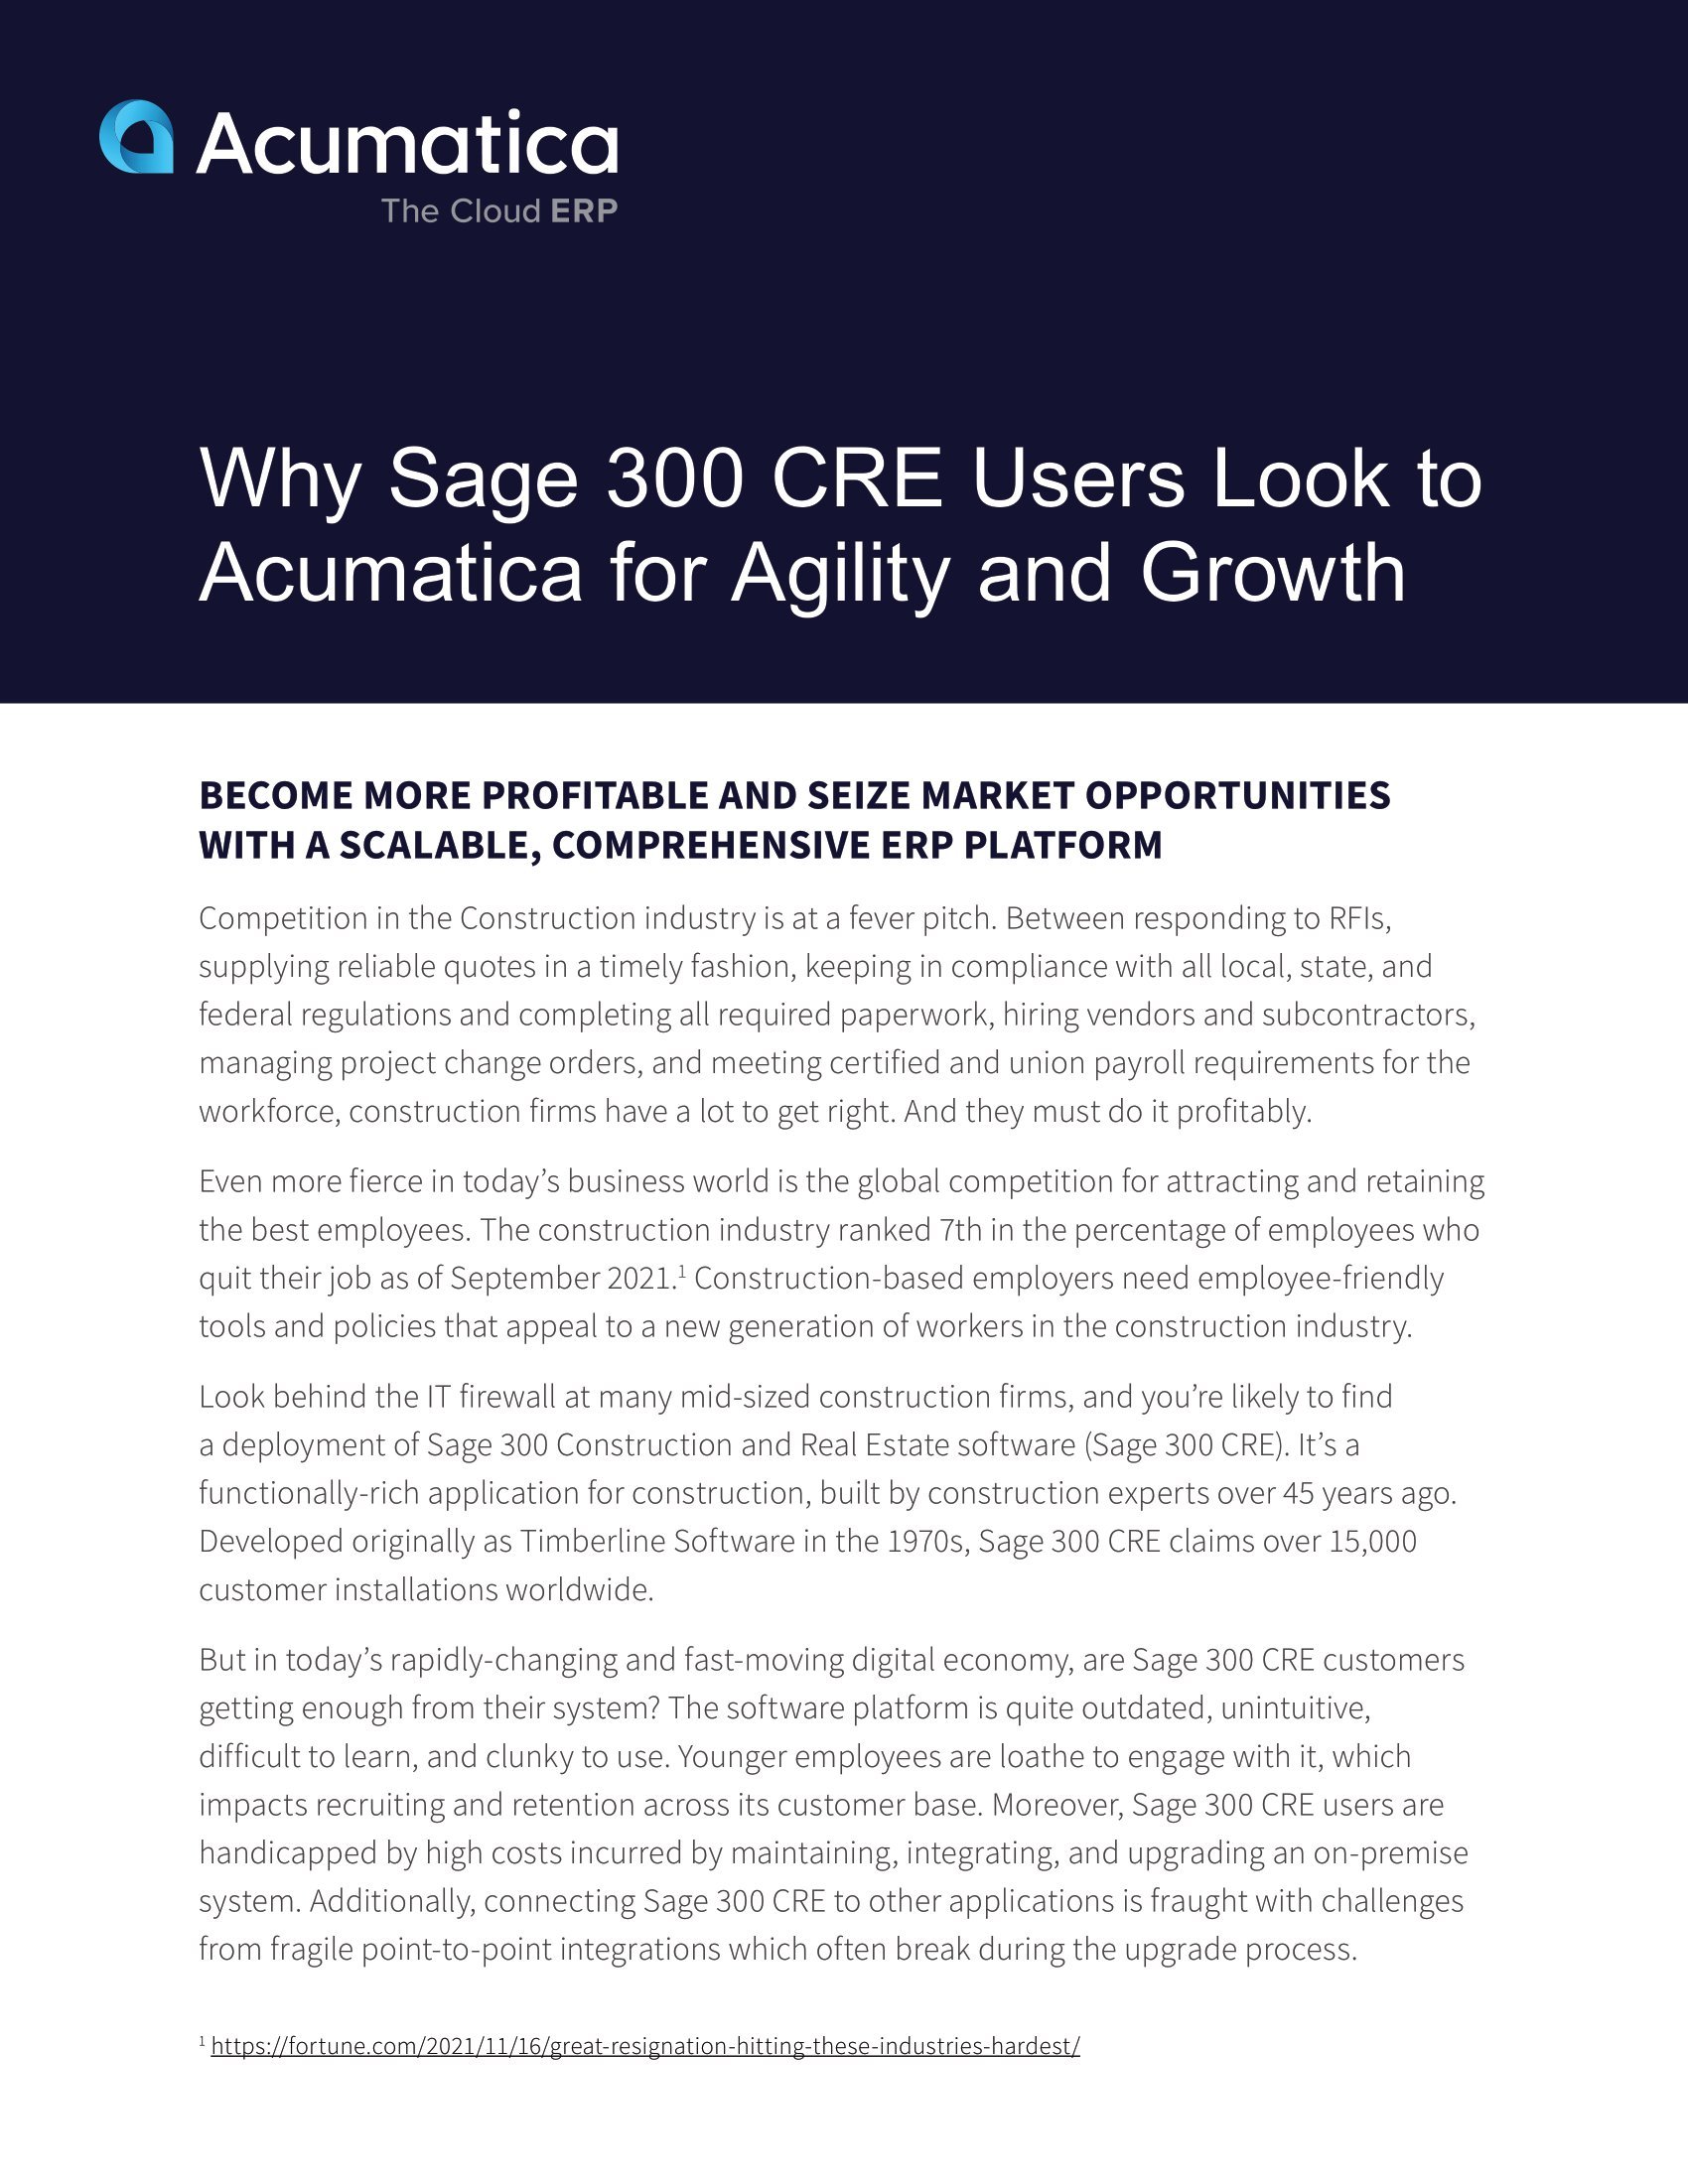 Why Construction Companies Are Moving From Sage 300 CRE to Acumatica